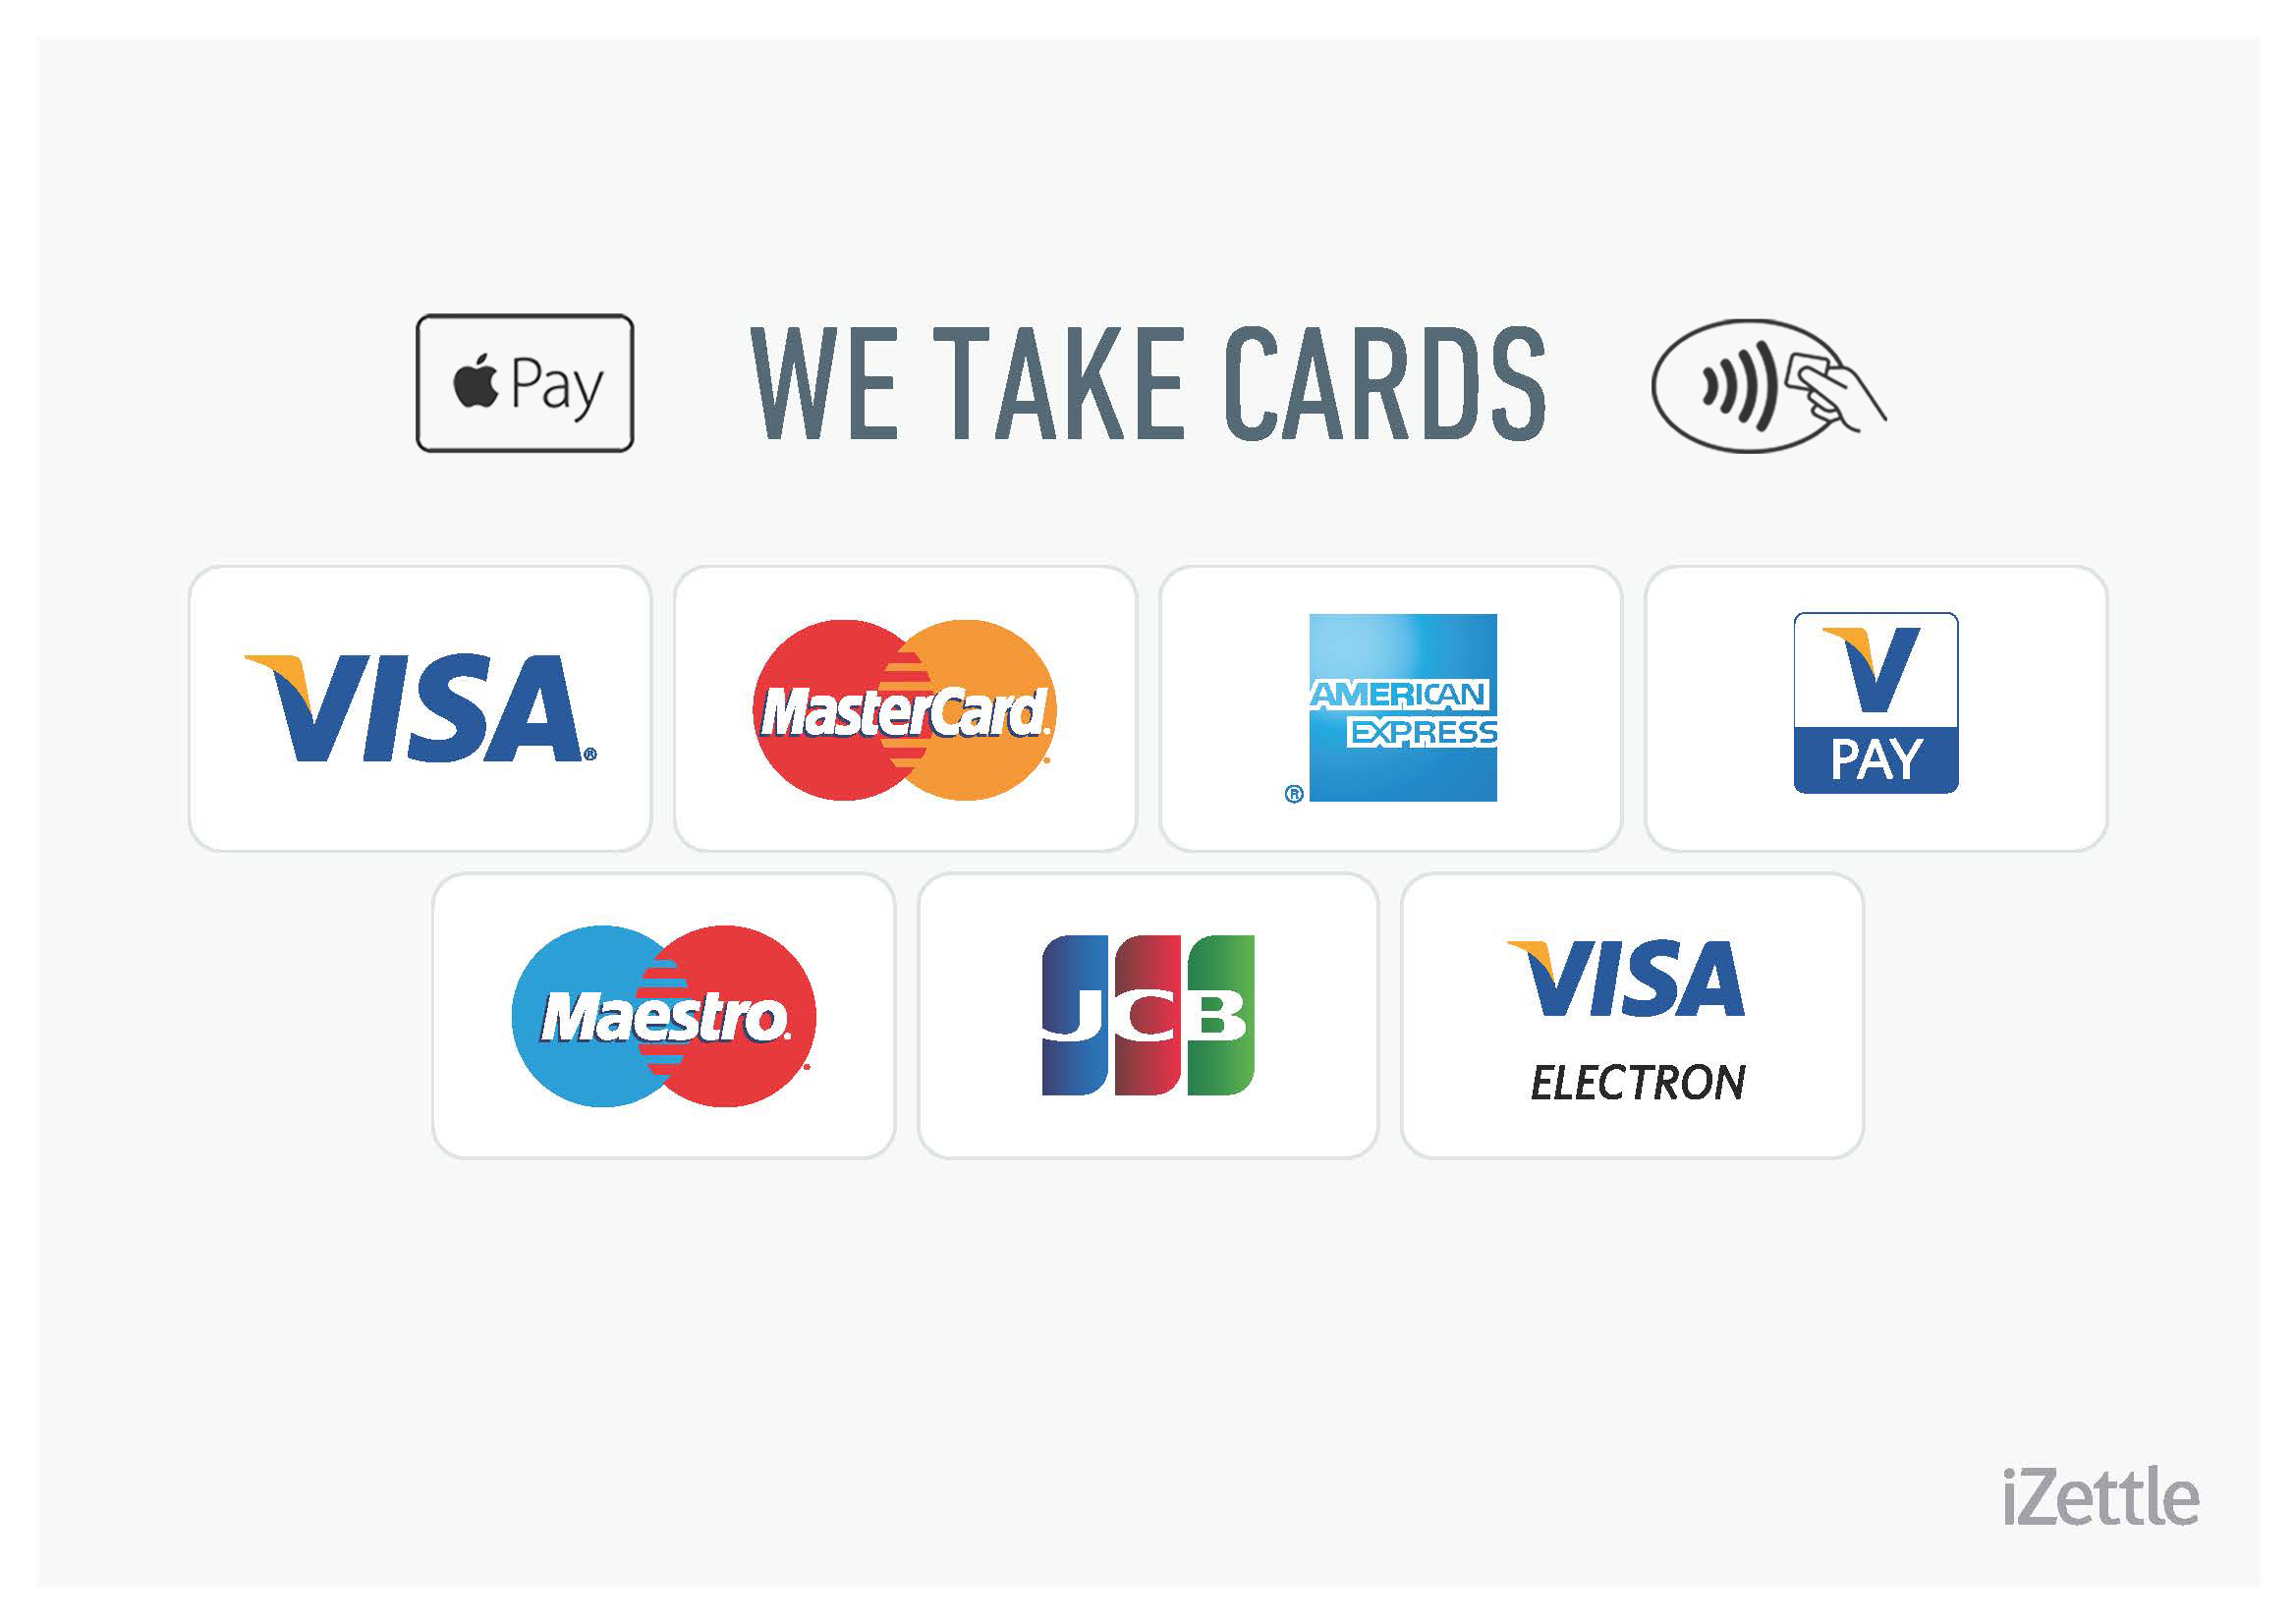 Pay accept. Pay карточка. Payment Card. CARDPAY. Payment by Card.